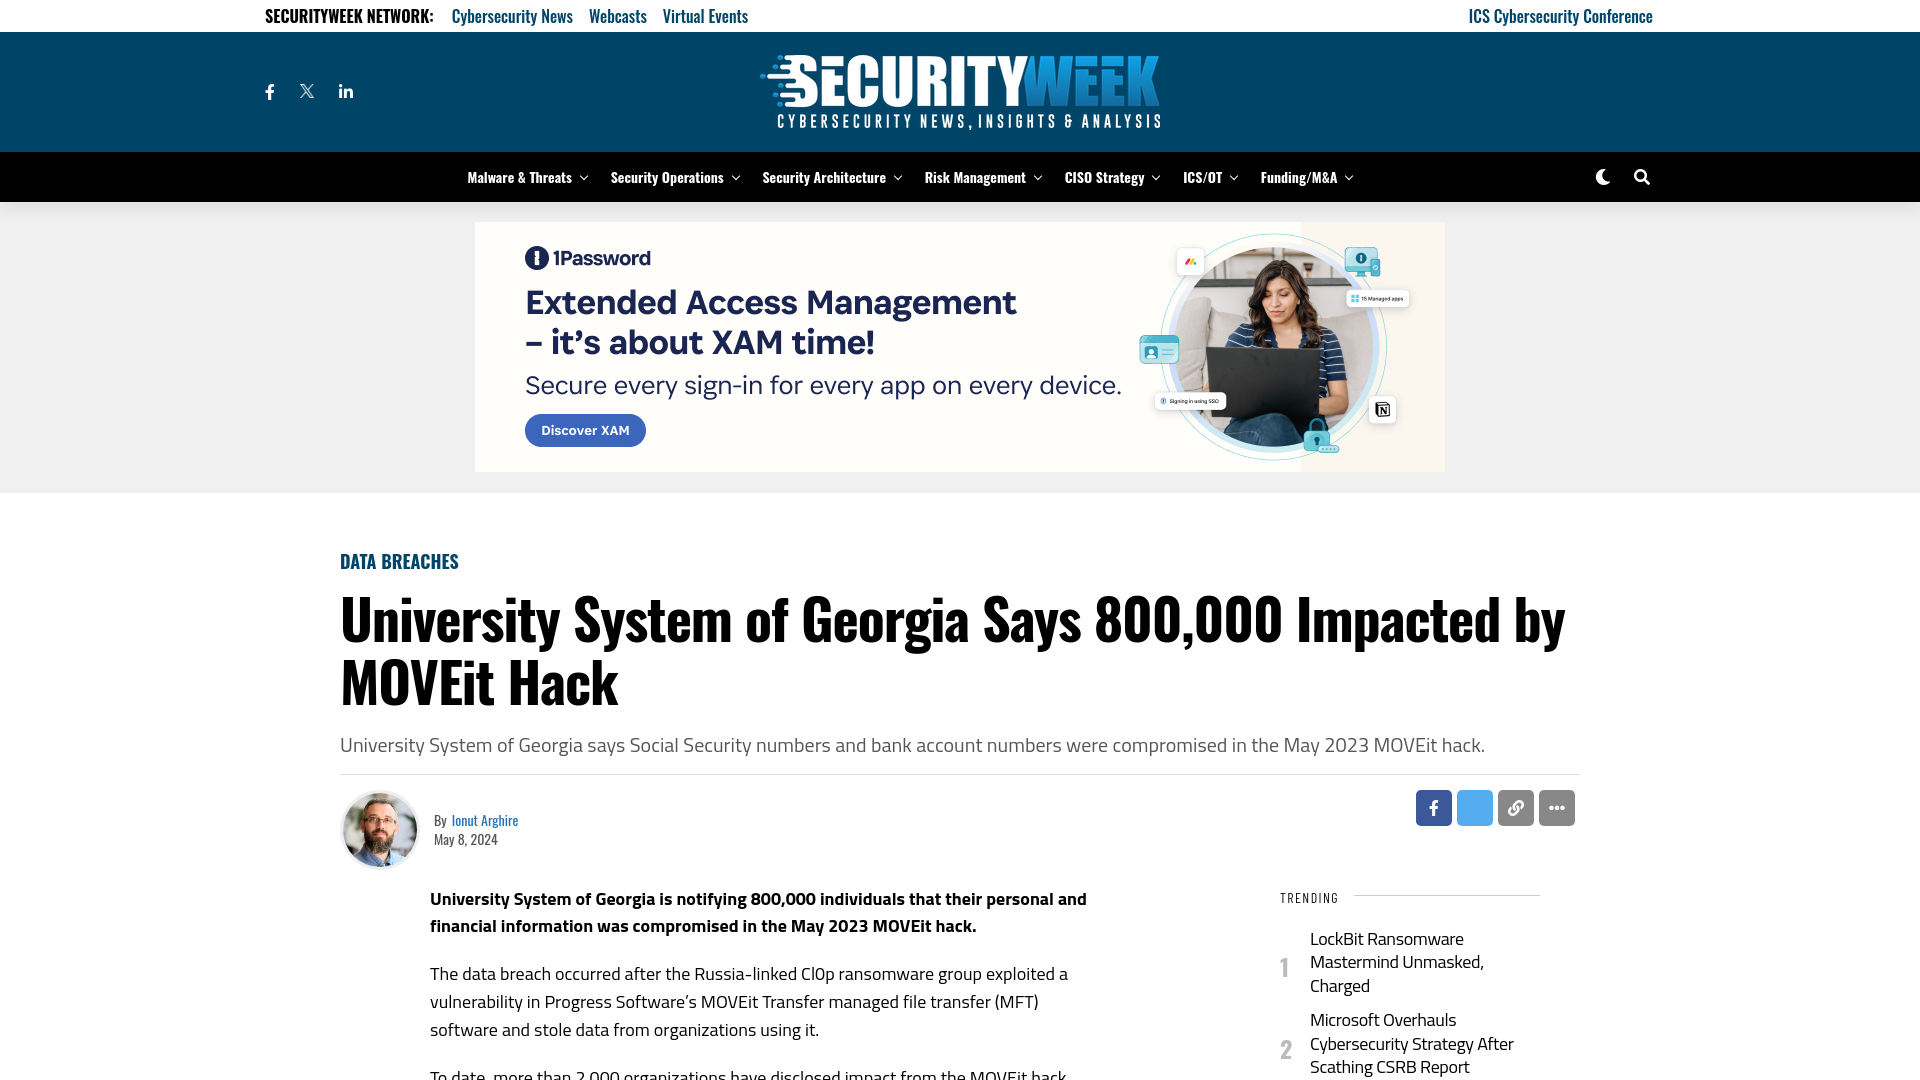 University System of Georgia Says 800,000 Impacted by MOVEit Hack - SecurityWeek